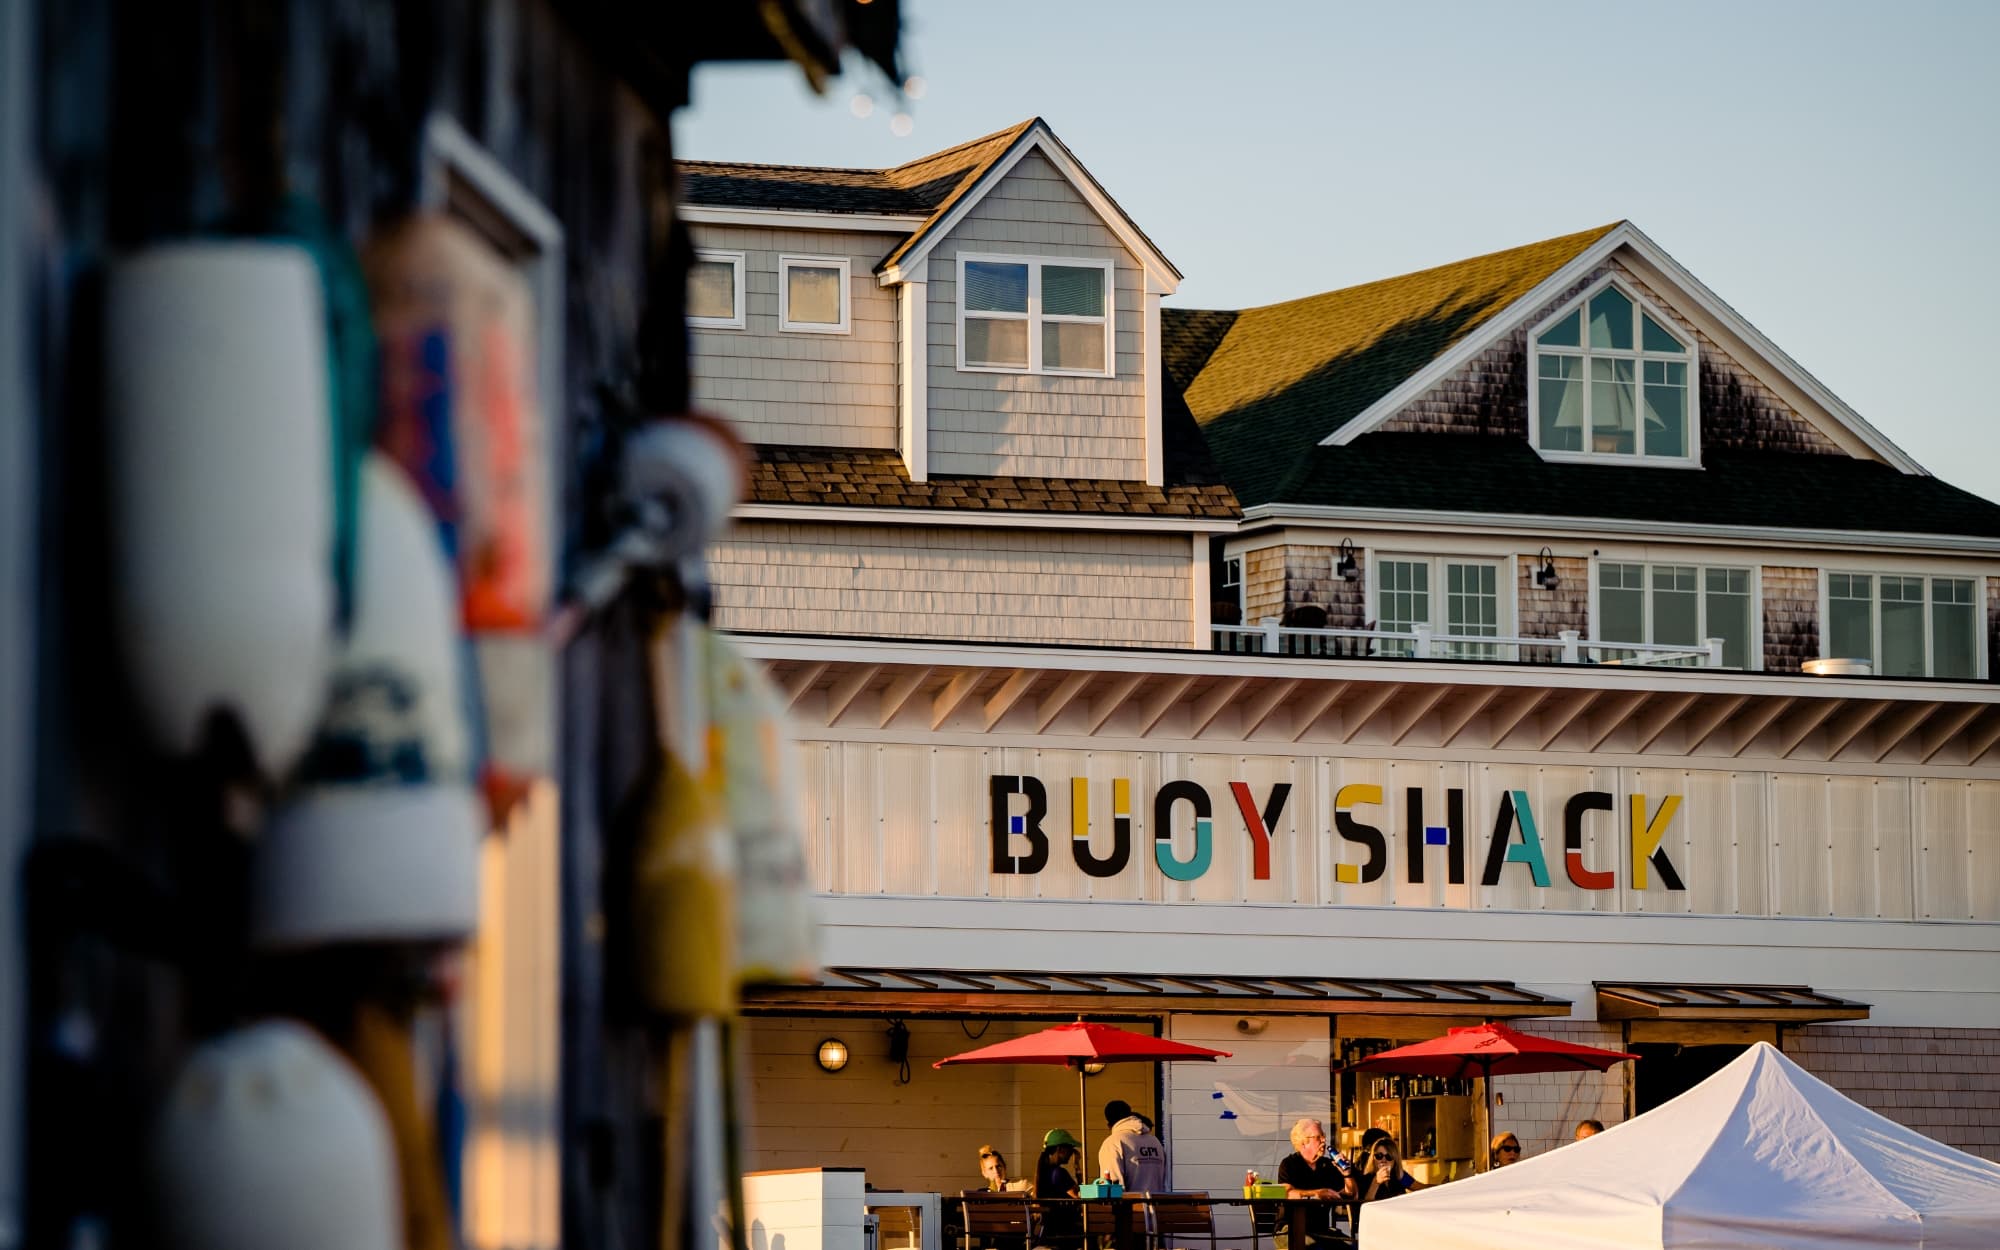 The Buoy Shack lobster shack and seafood restaurant with a heritage buoy shack to its left.